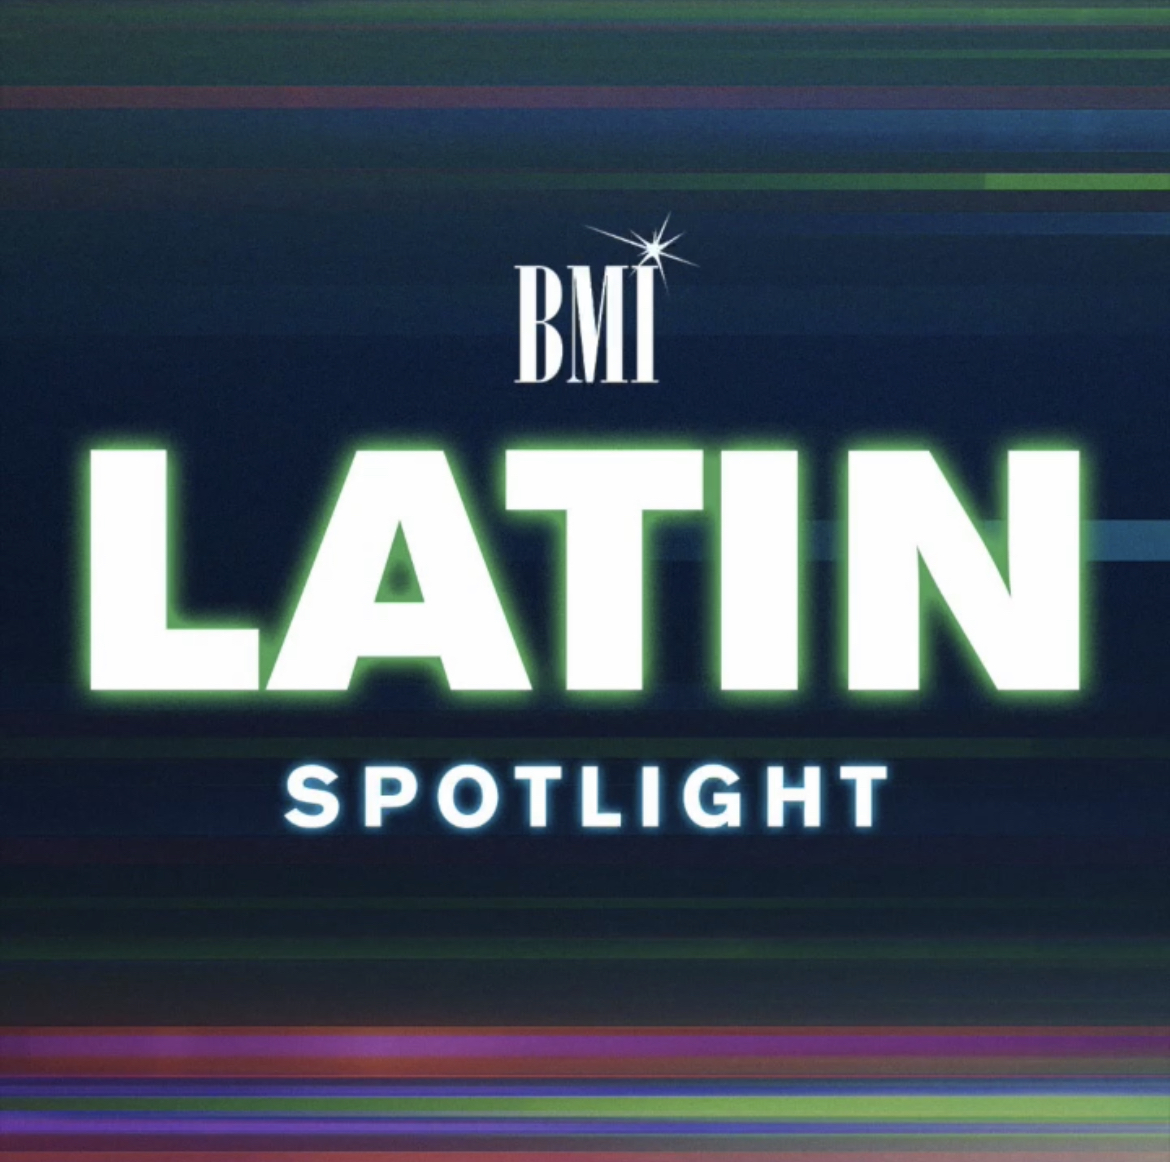 This season’s Latin Spotlight is LIVE, featuring an exclusive video, 12 of our talented #BMIFamilia and more! Visit our Latin Spotlight page here: bmi.com/genres/latin 😆✨